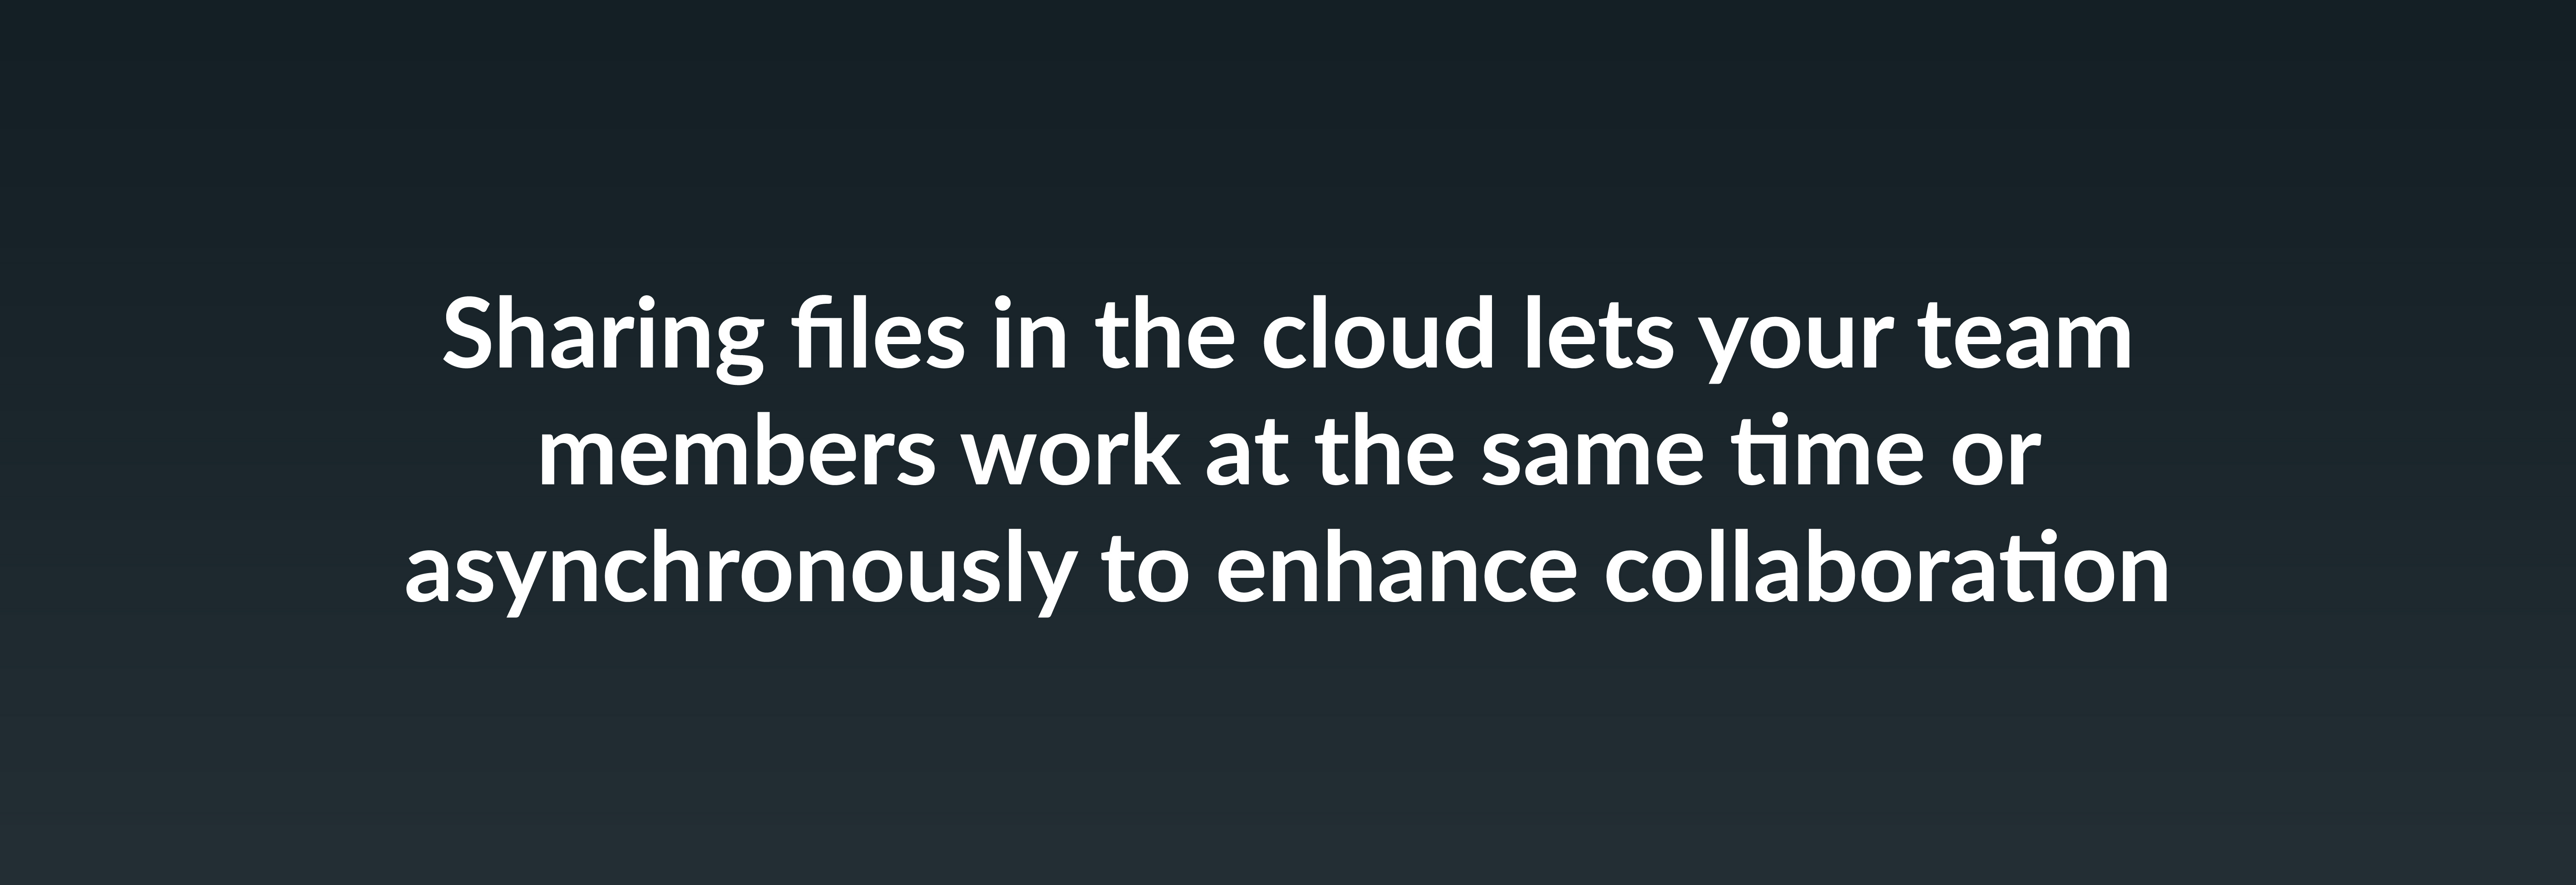 Sharing files in the cloud lets your team members work at the same time or asynchronously to enhance collaboration